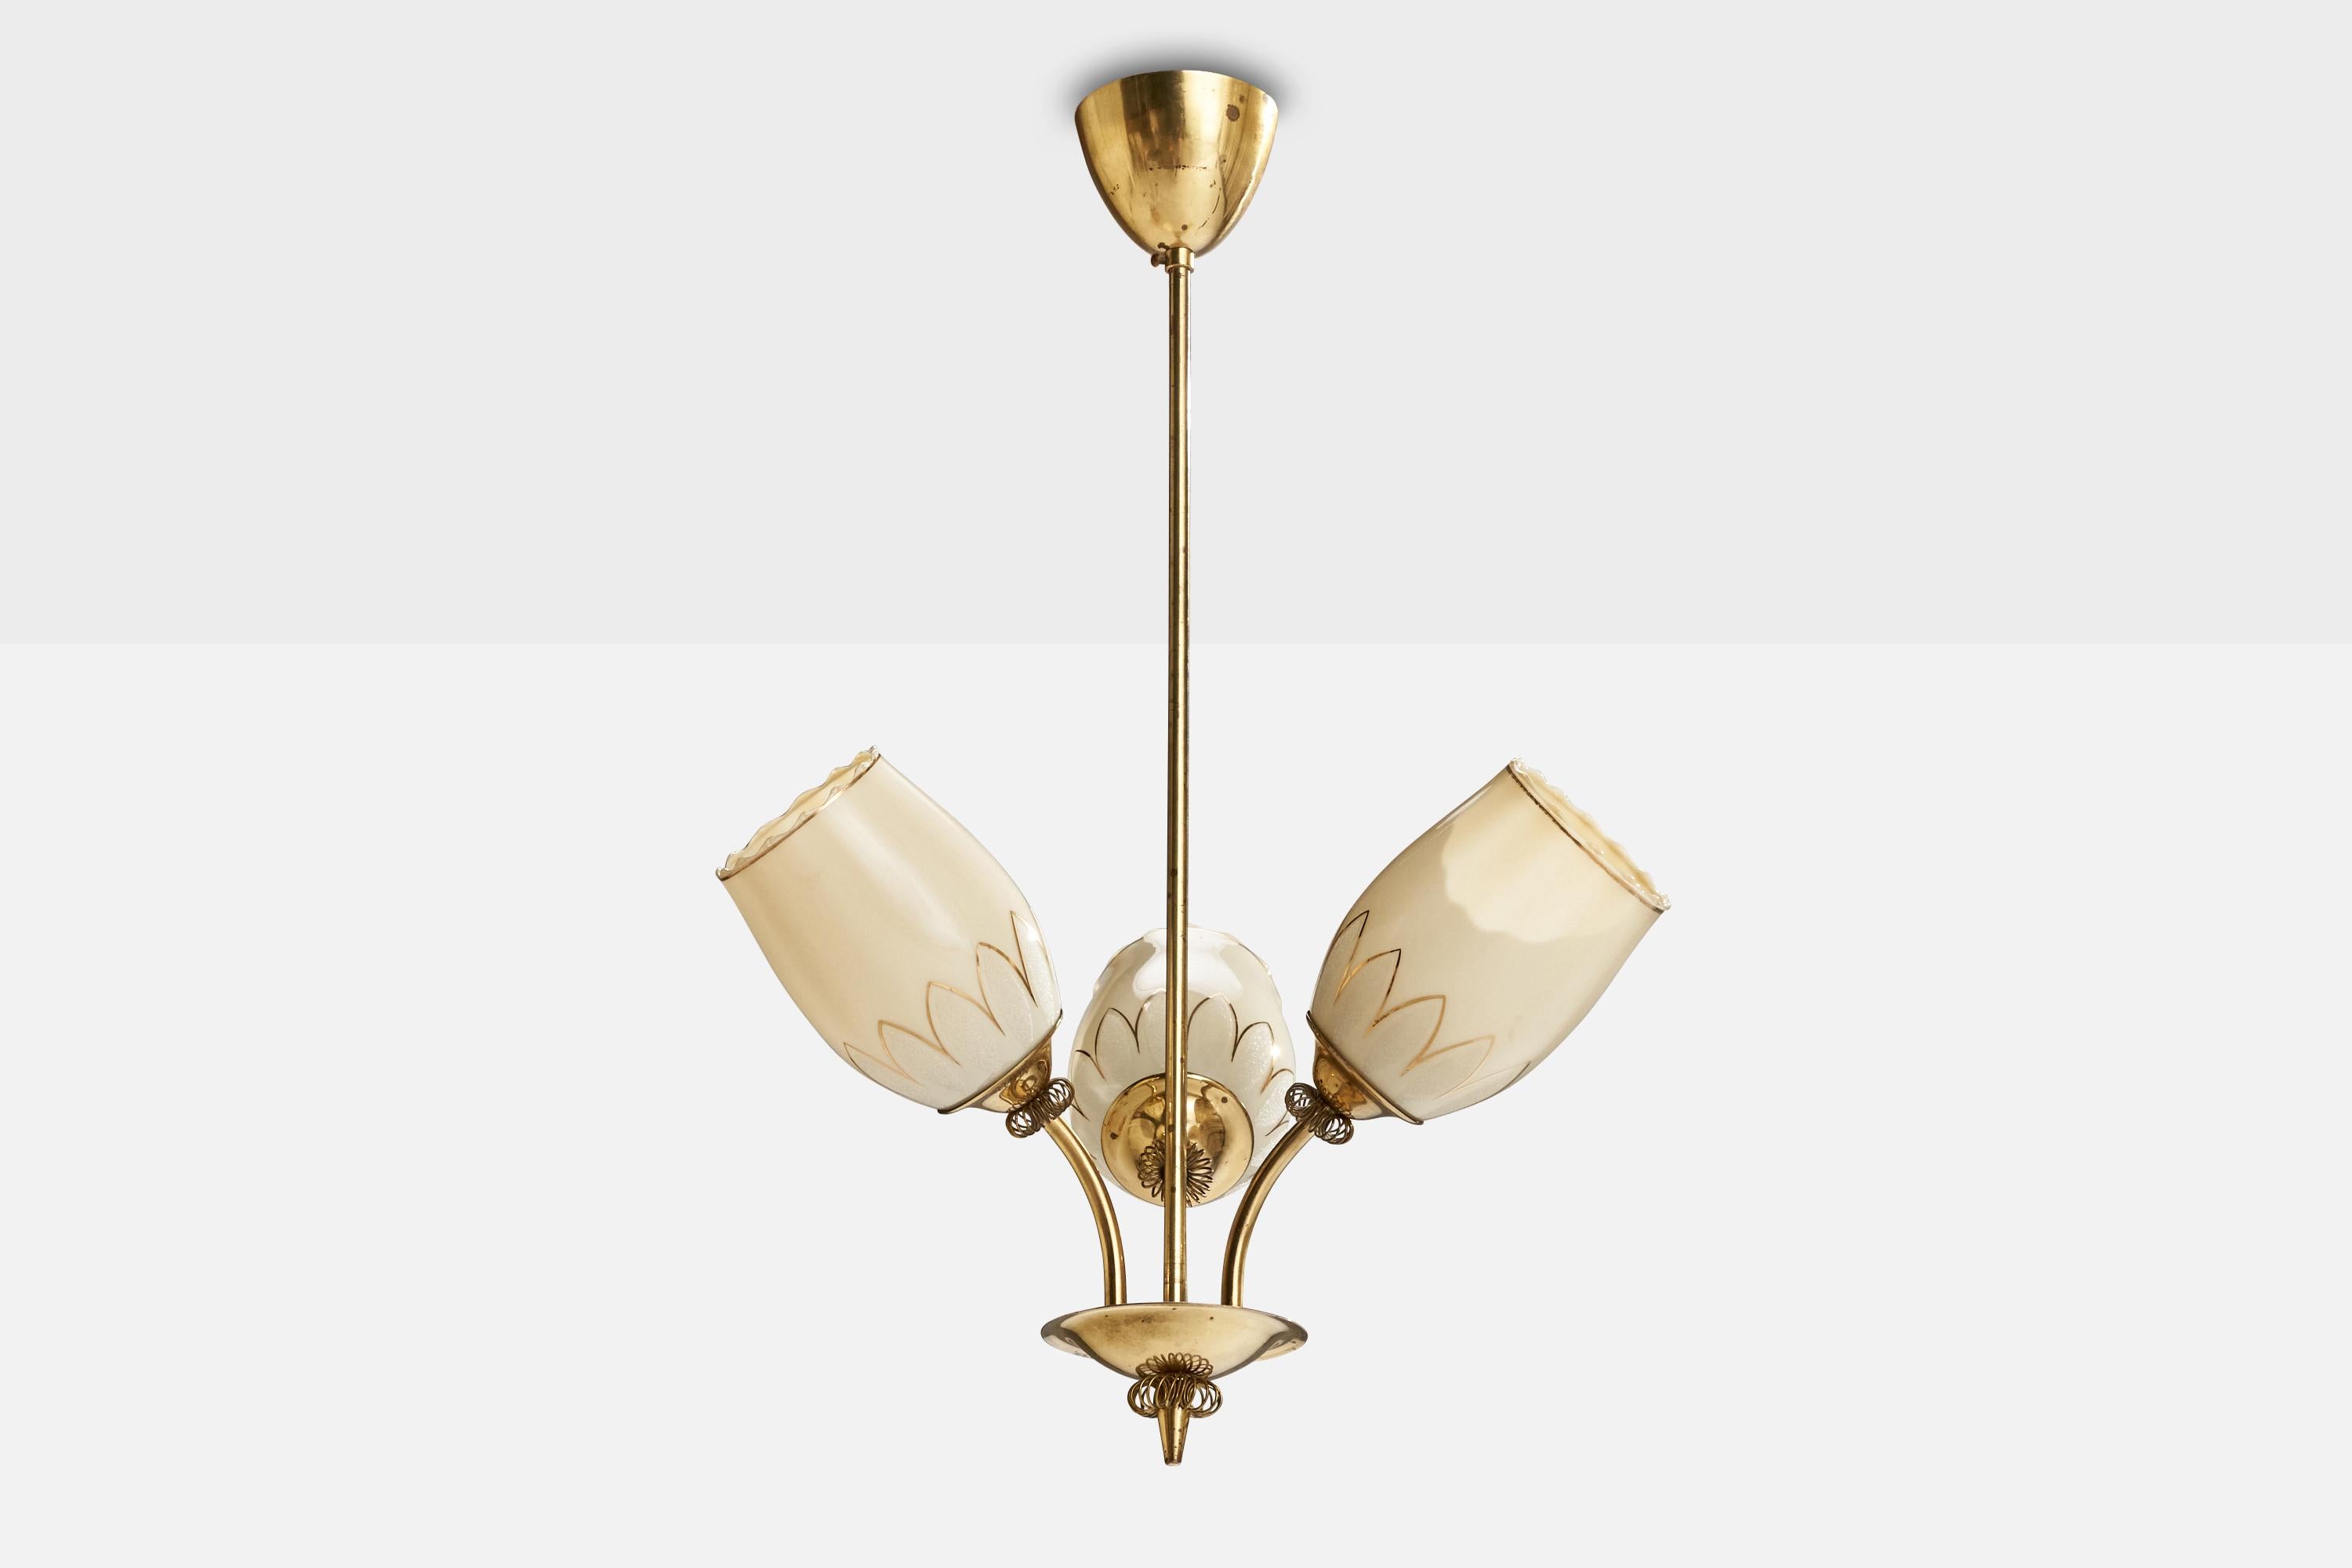 A brass and gilded opaline glass chandelier produced by ITSU, Finland, 1940s.

Dimensions of canopy (inches): 3.75” H x 3.32” Diameter
Socket takes standard E-26 bulbs. 3 socket.There is no maximum wattage stated on the fixture. All lighting will be